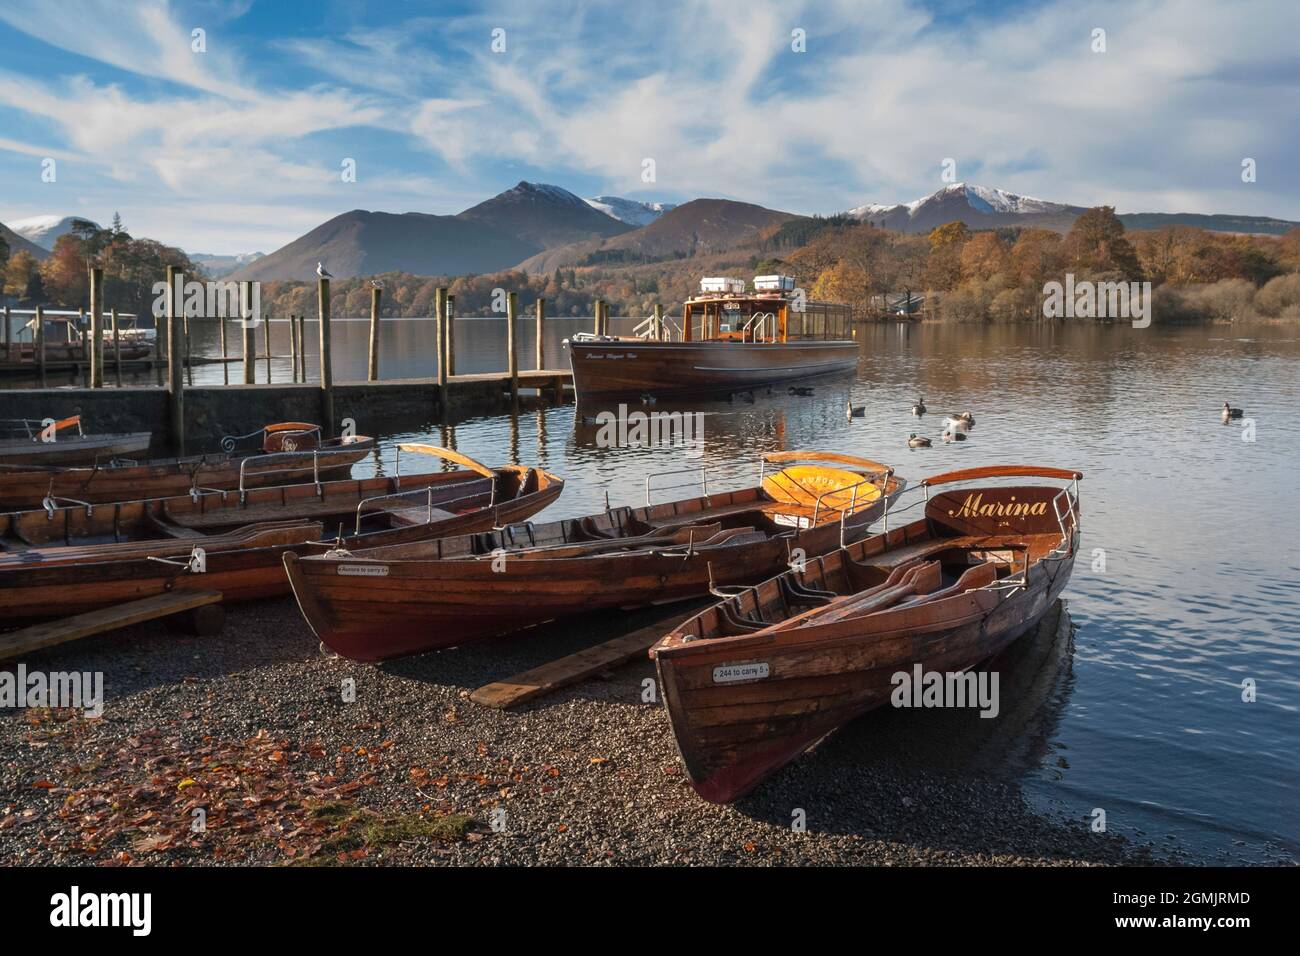 Derwentwater, at 3 miles long, 1 mile wide and 72 feet deep, is fed by the River Derwent catchment area in the high fells at the head of Borrowdale, a Stock Photo